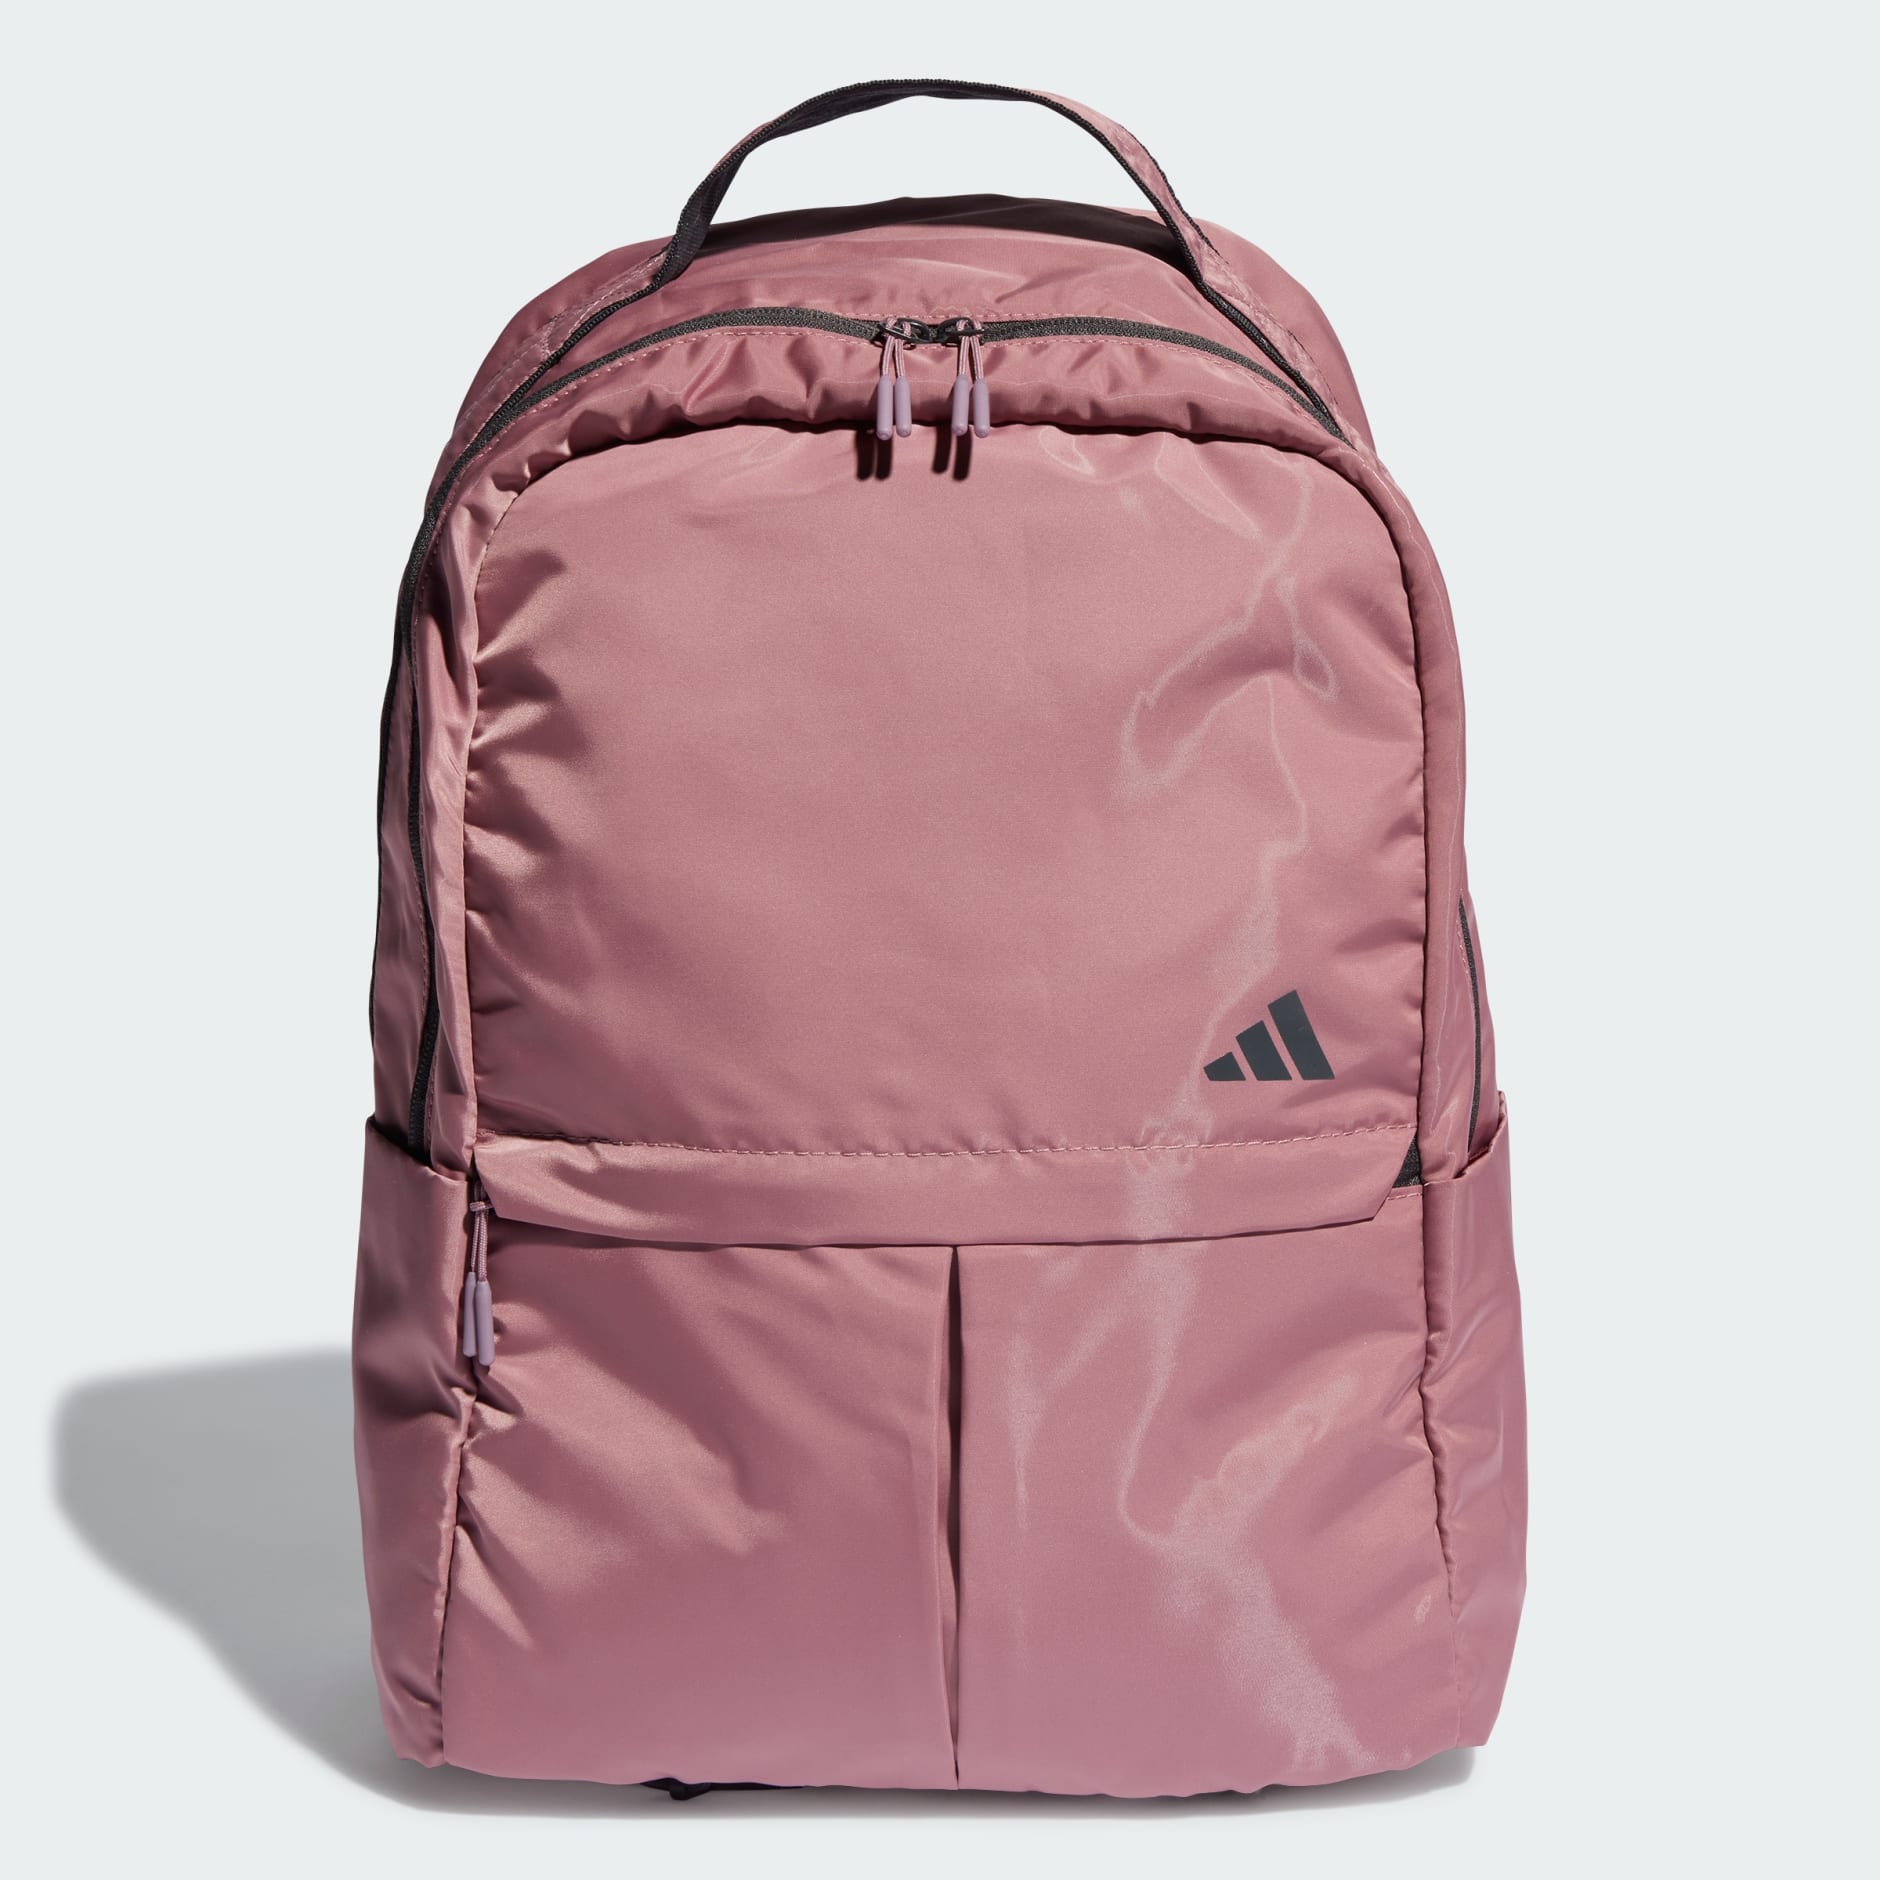 Women's Accessories - Yoga Backpack - Pink